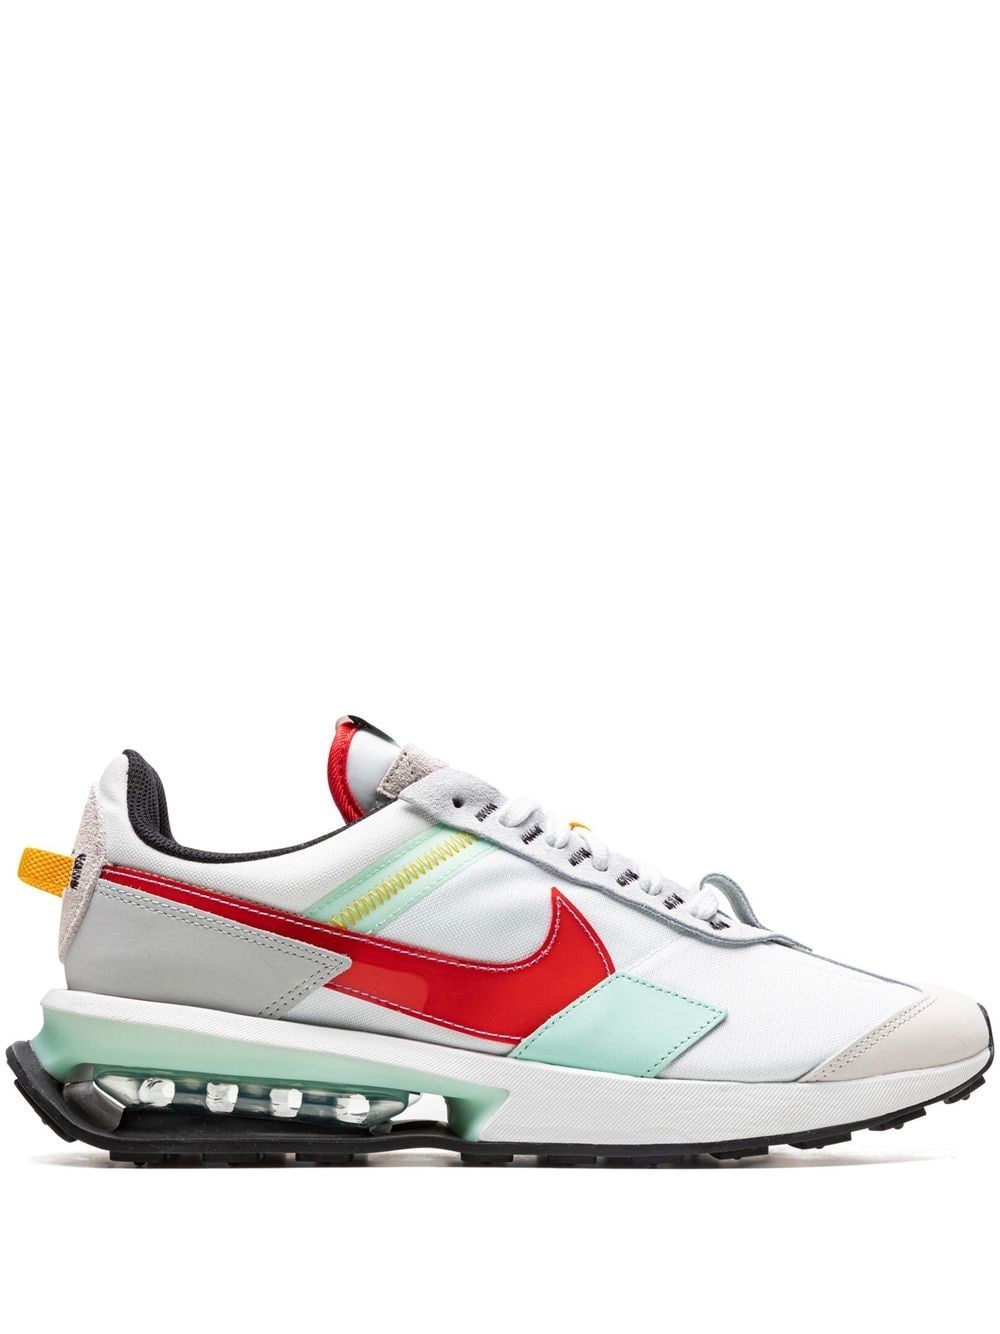 Shop Nike Air Max Pre-day "white Mint Foam University Red" Sneakers